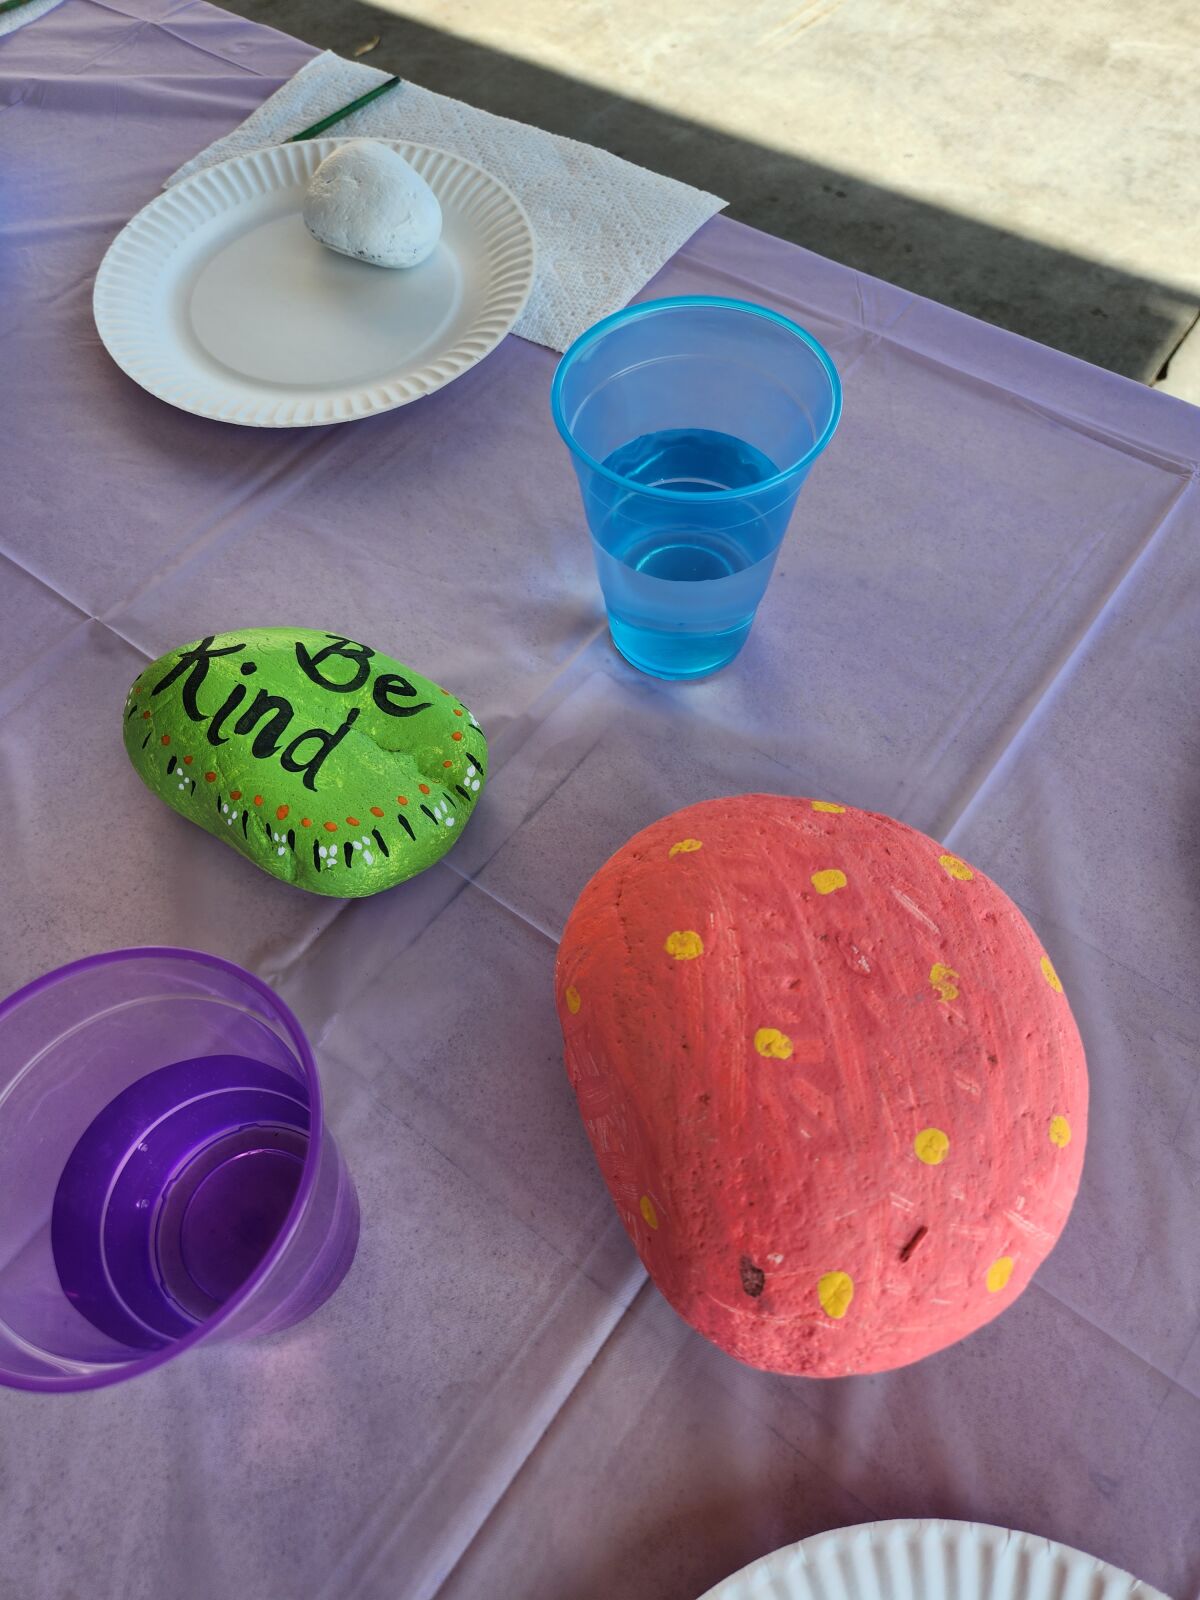 Rock painting at the open house tribute. Painted rocks will be placed in the garden reading area.